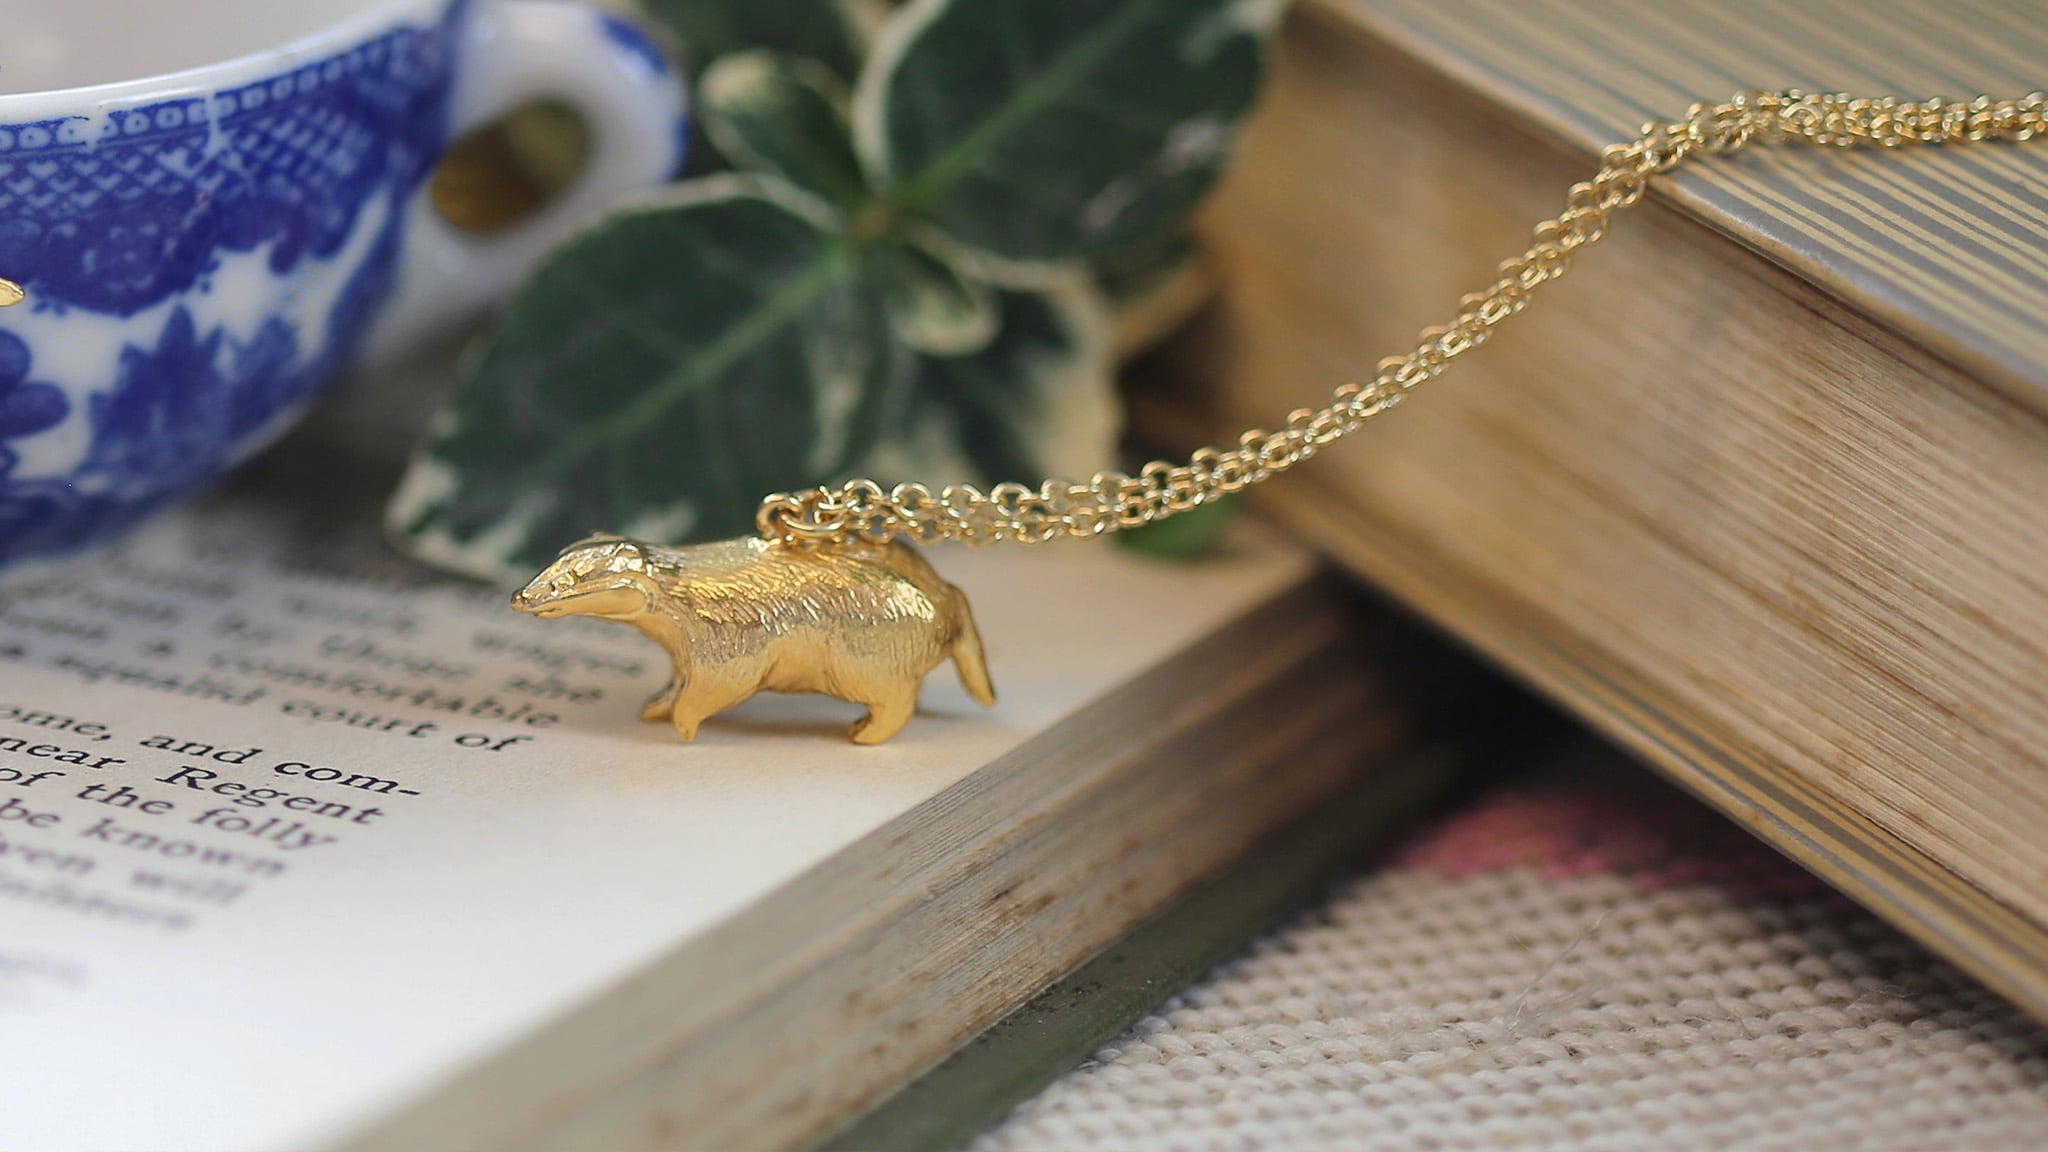 14K YELLOW GOLD PAVE TEDDY BEAR NECKLACE | Patty Q's Jewelry Inc